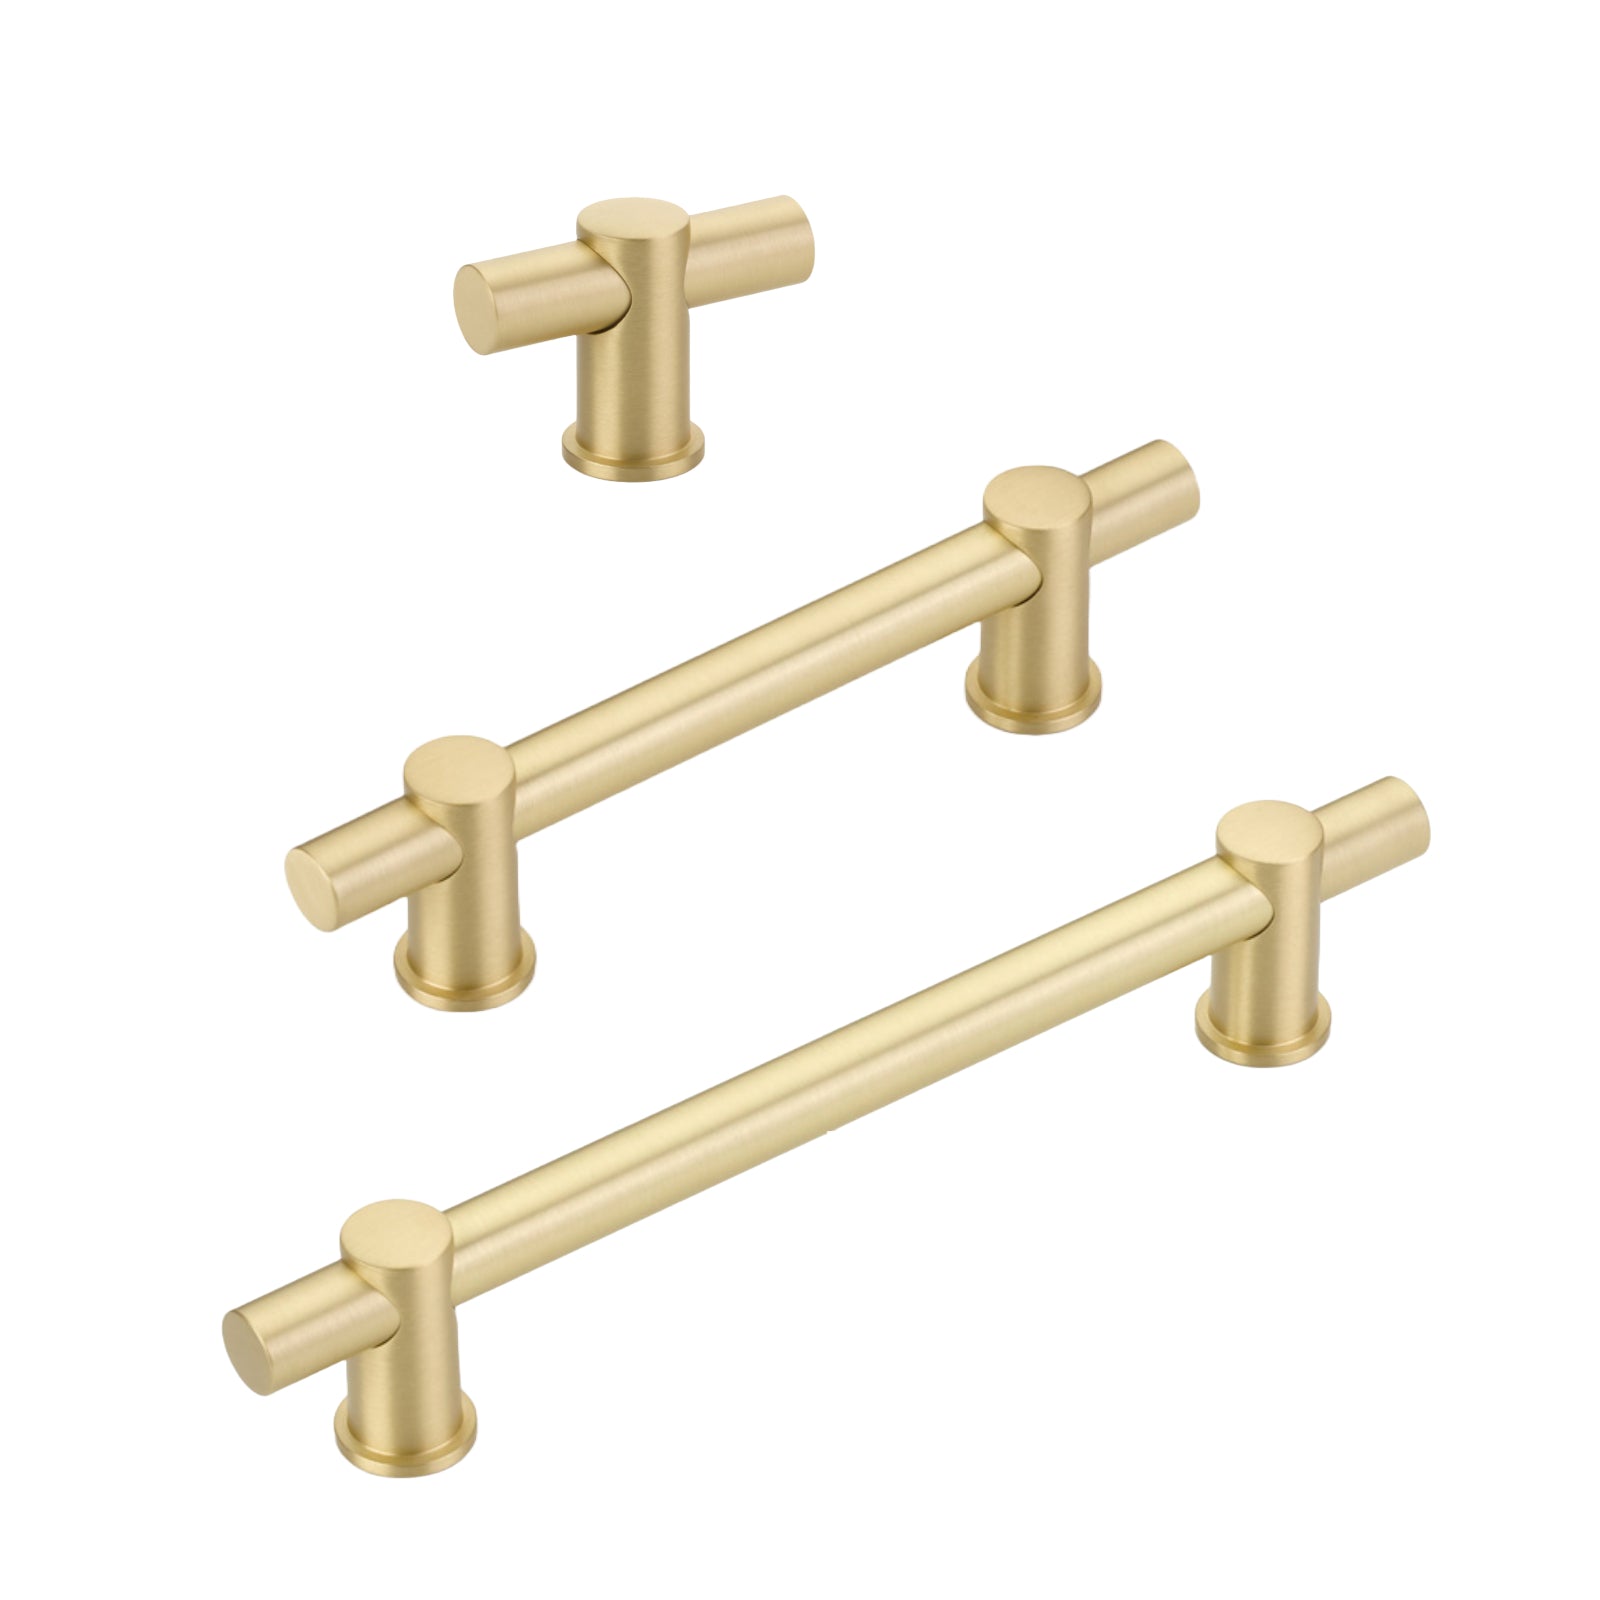 Satin Brass Round T-Bar "Fancy" Cabinet Knobs and Drawer Pulls - Forge Hardware Studio